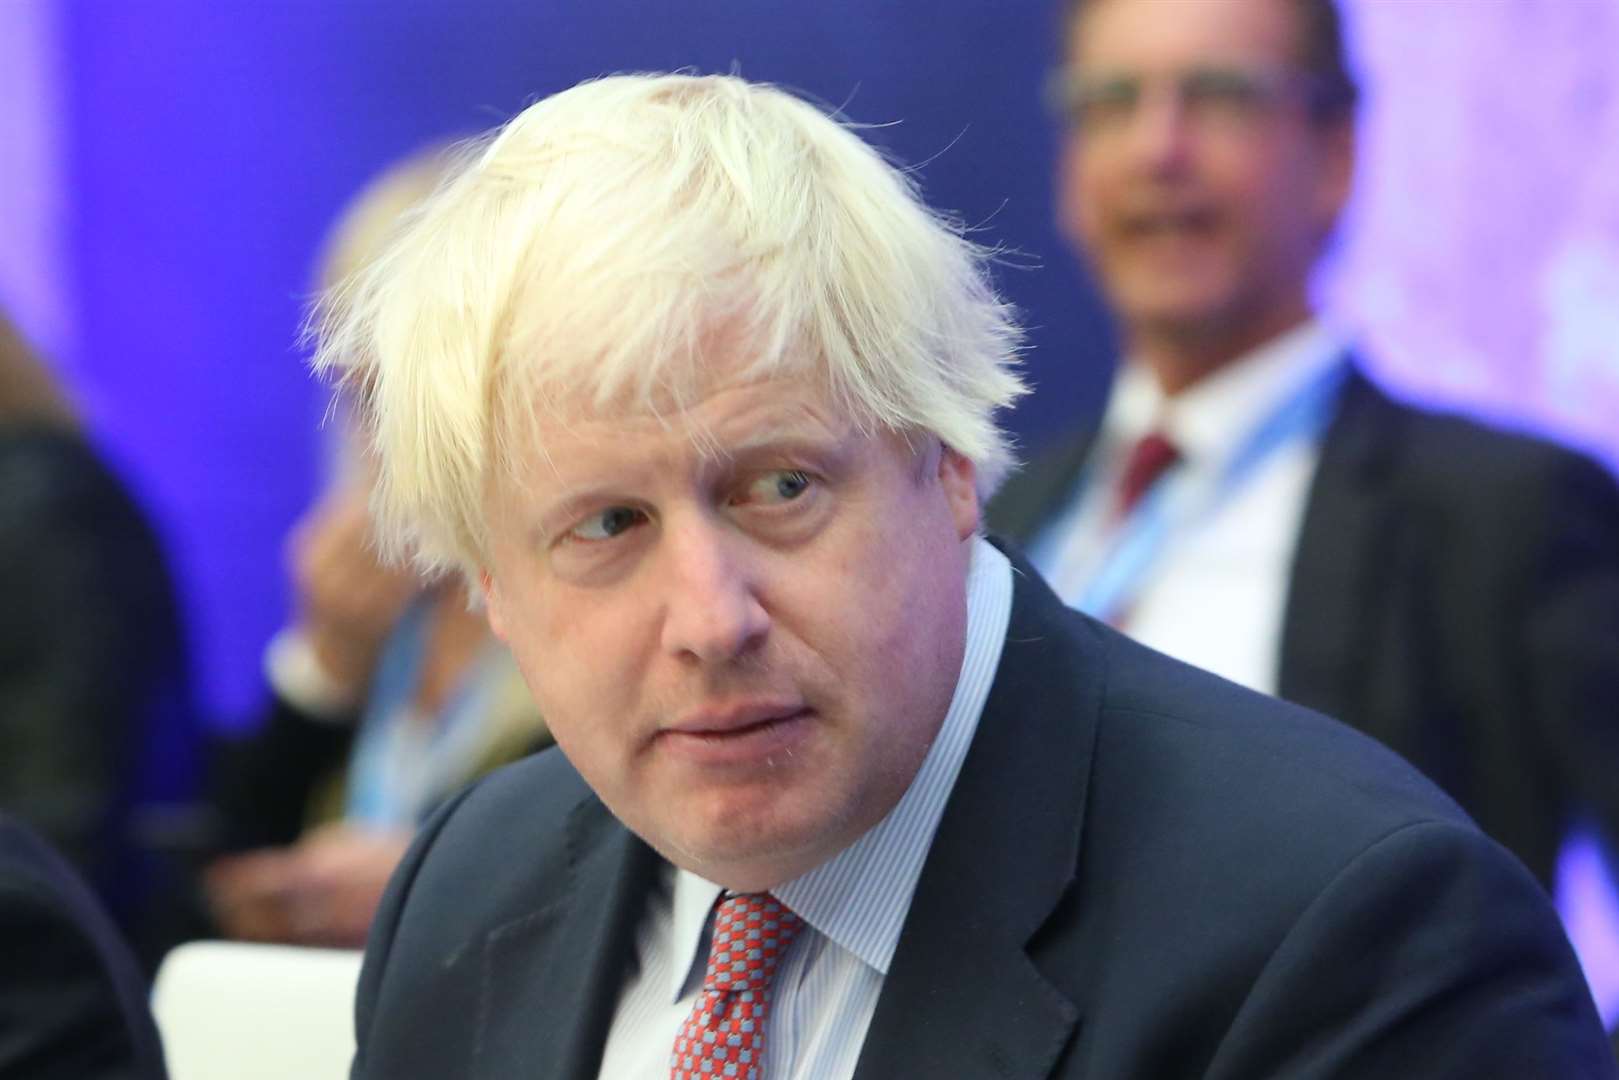 Could Boris best Farage in a fight?